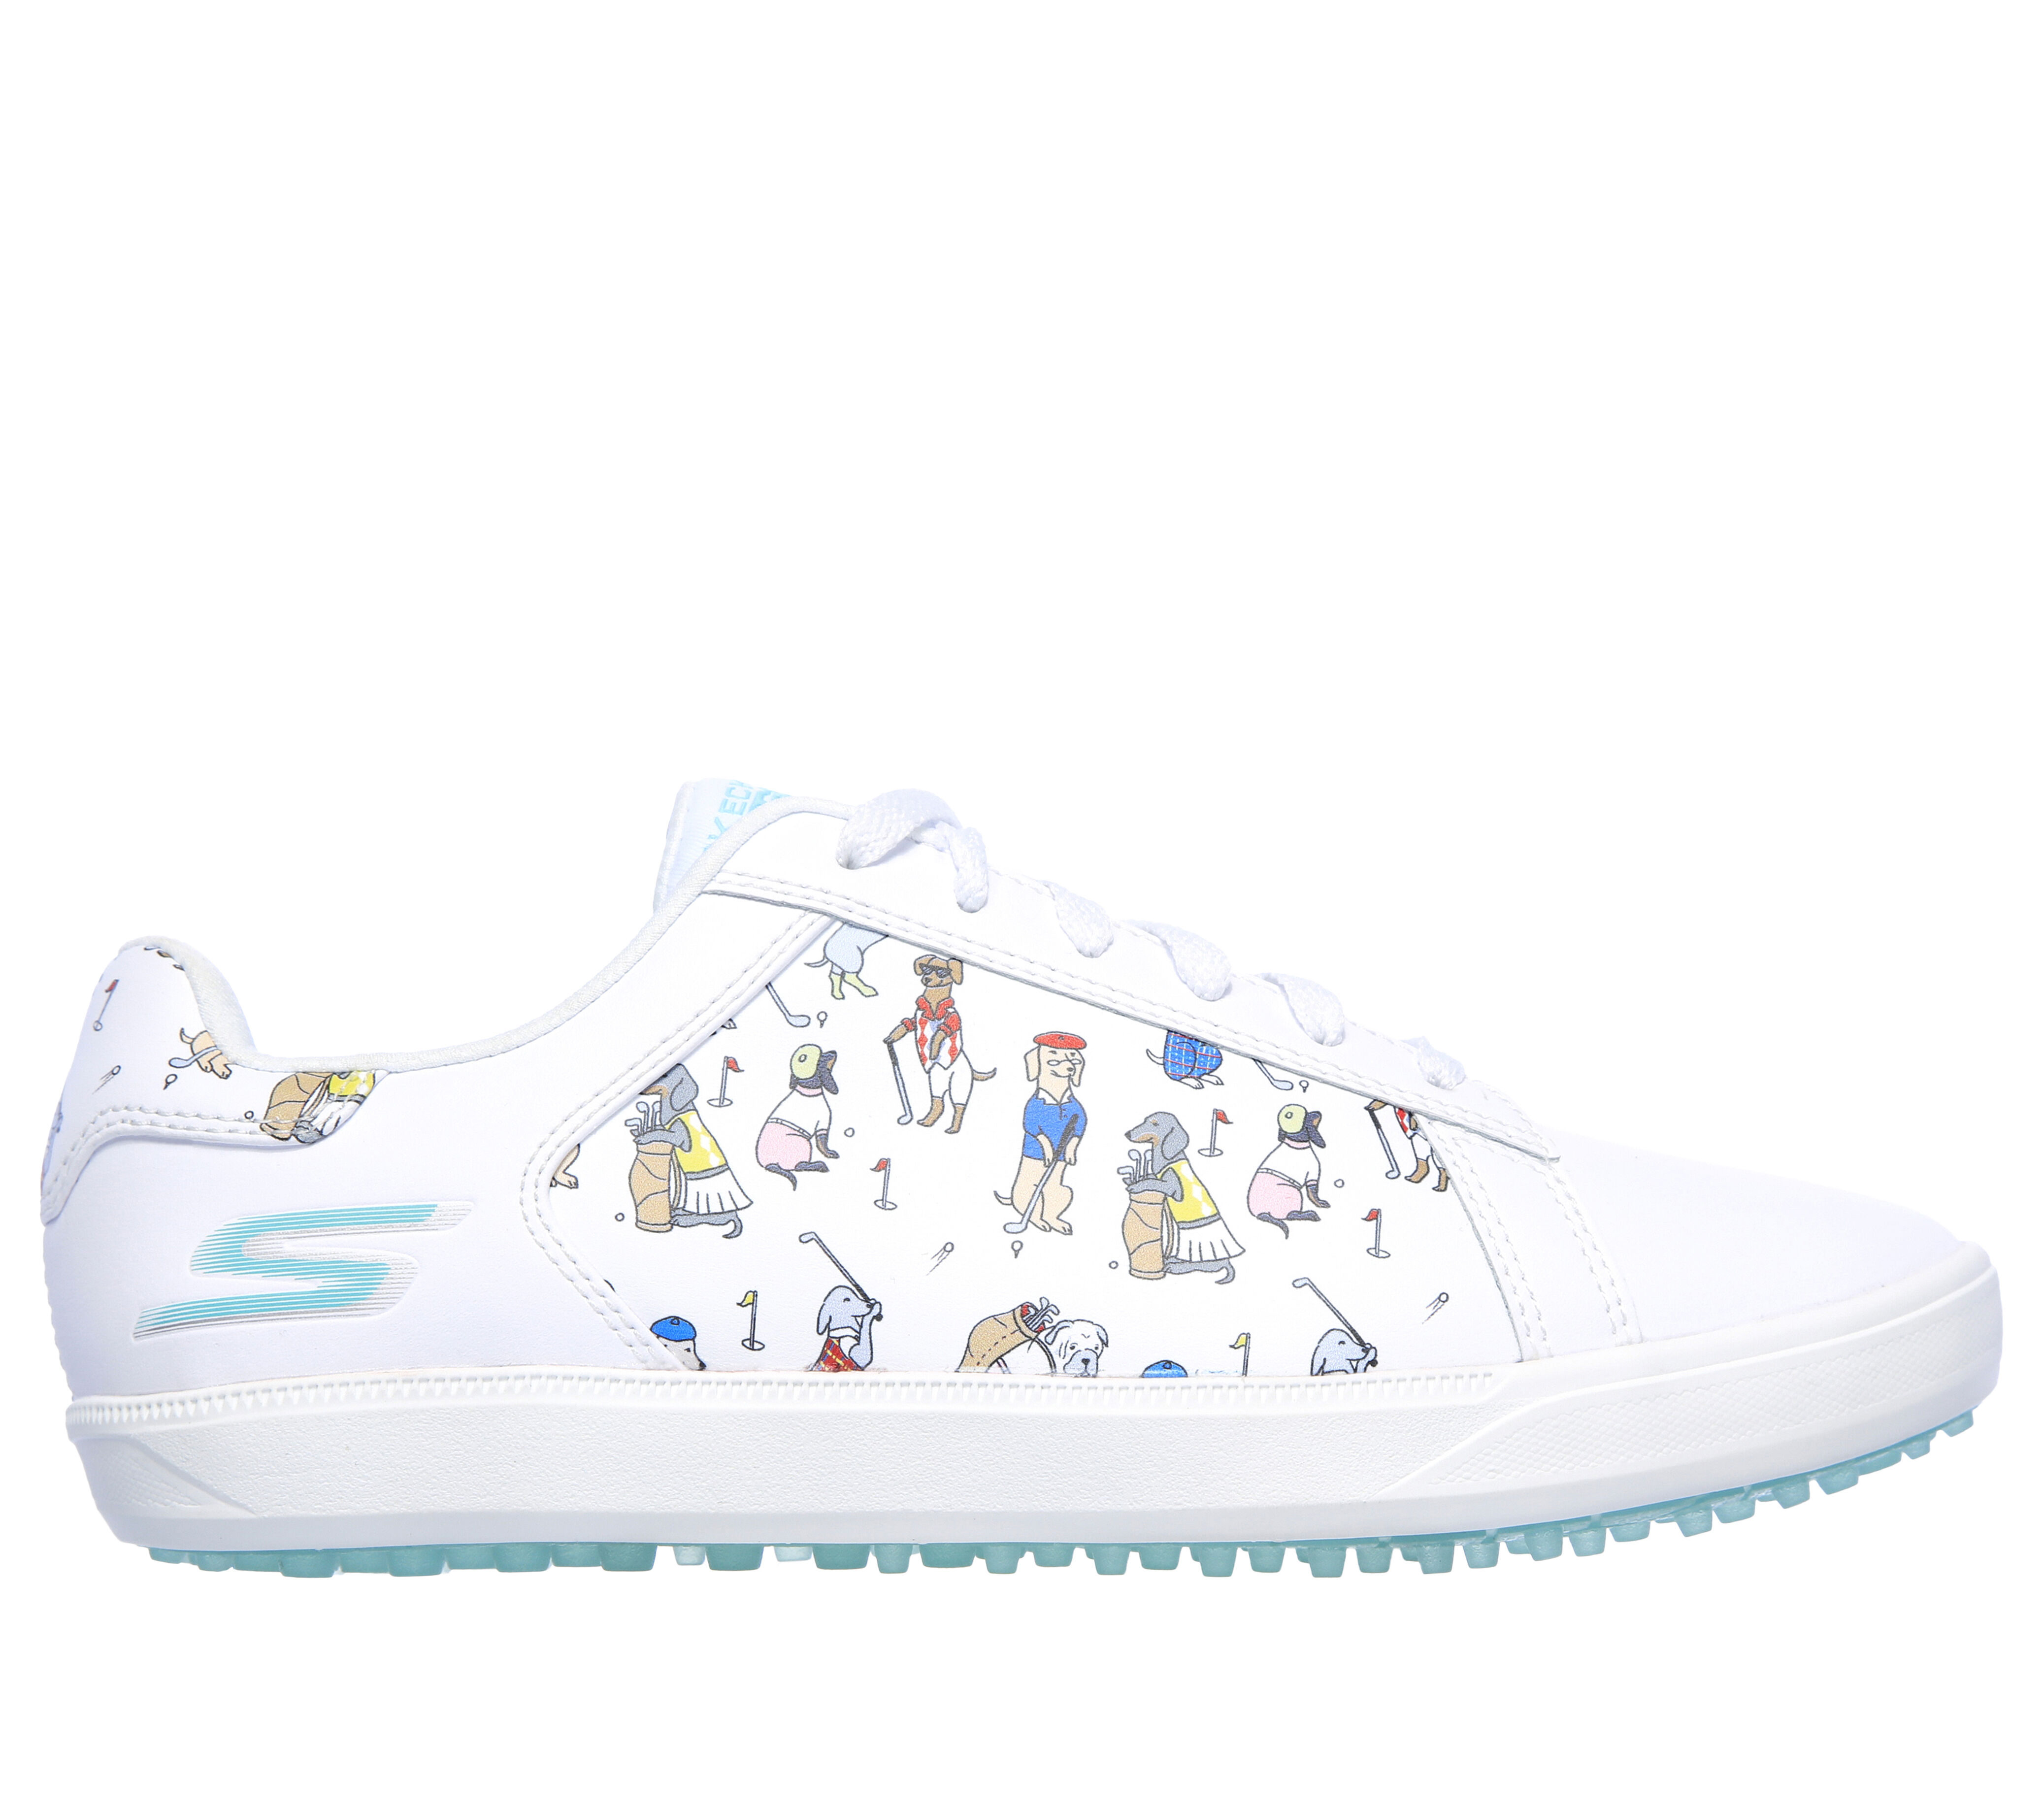 white skechers golf shoes